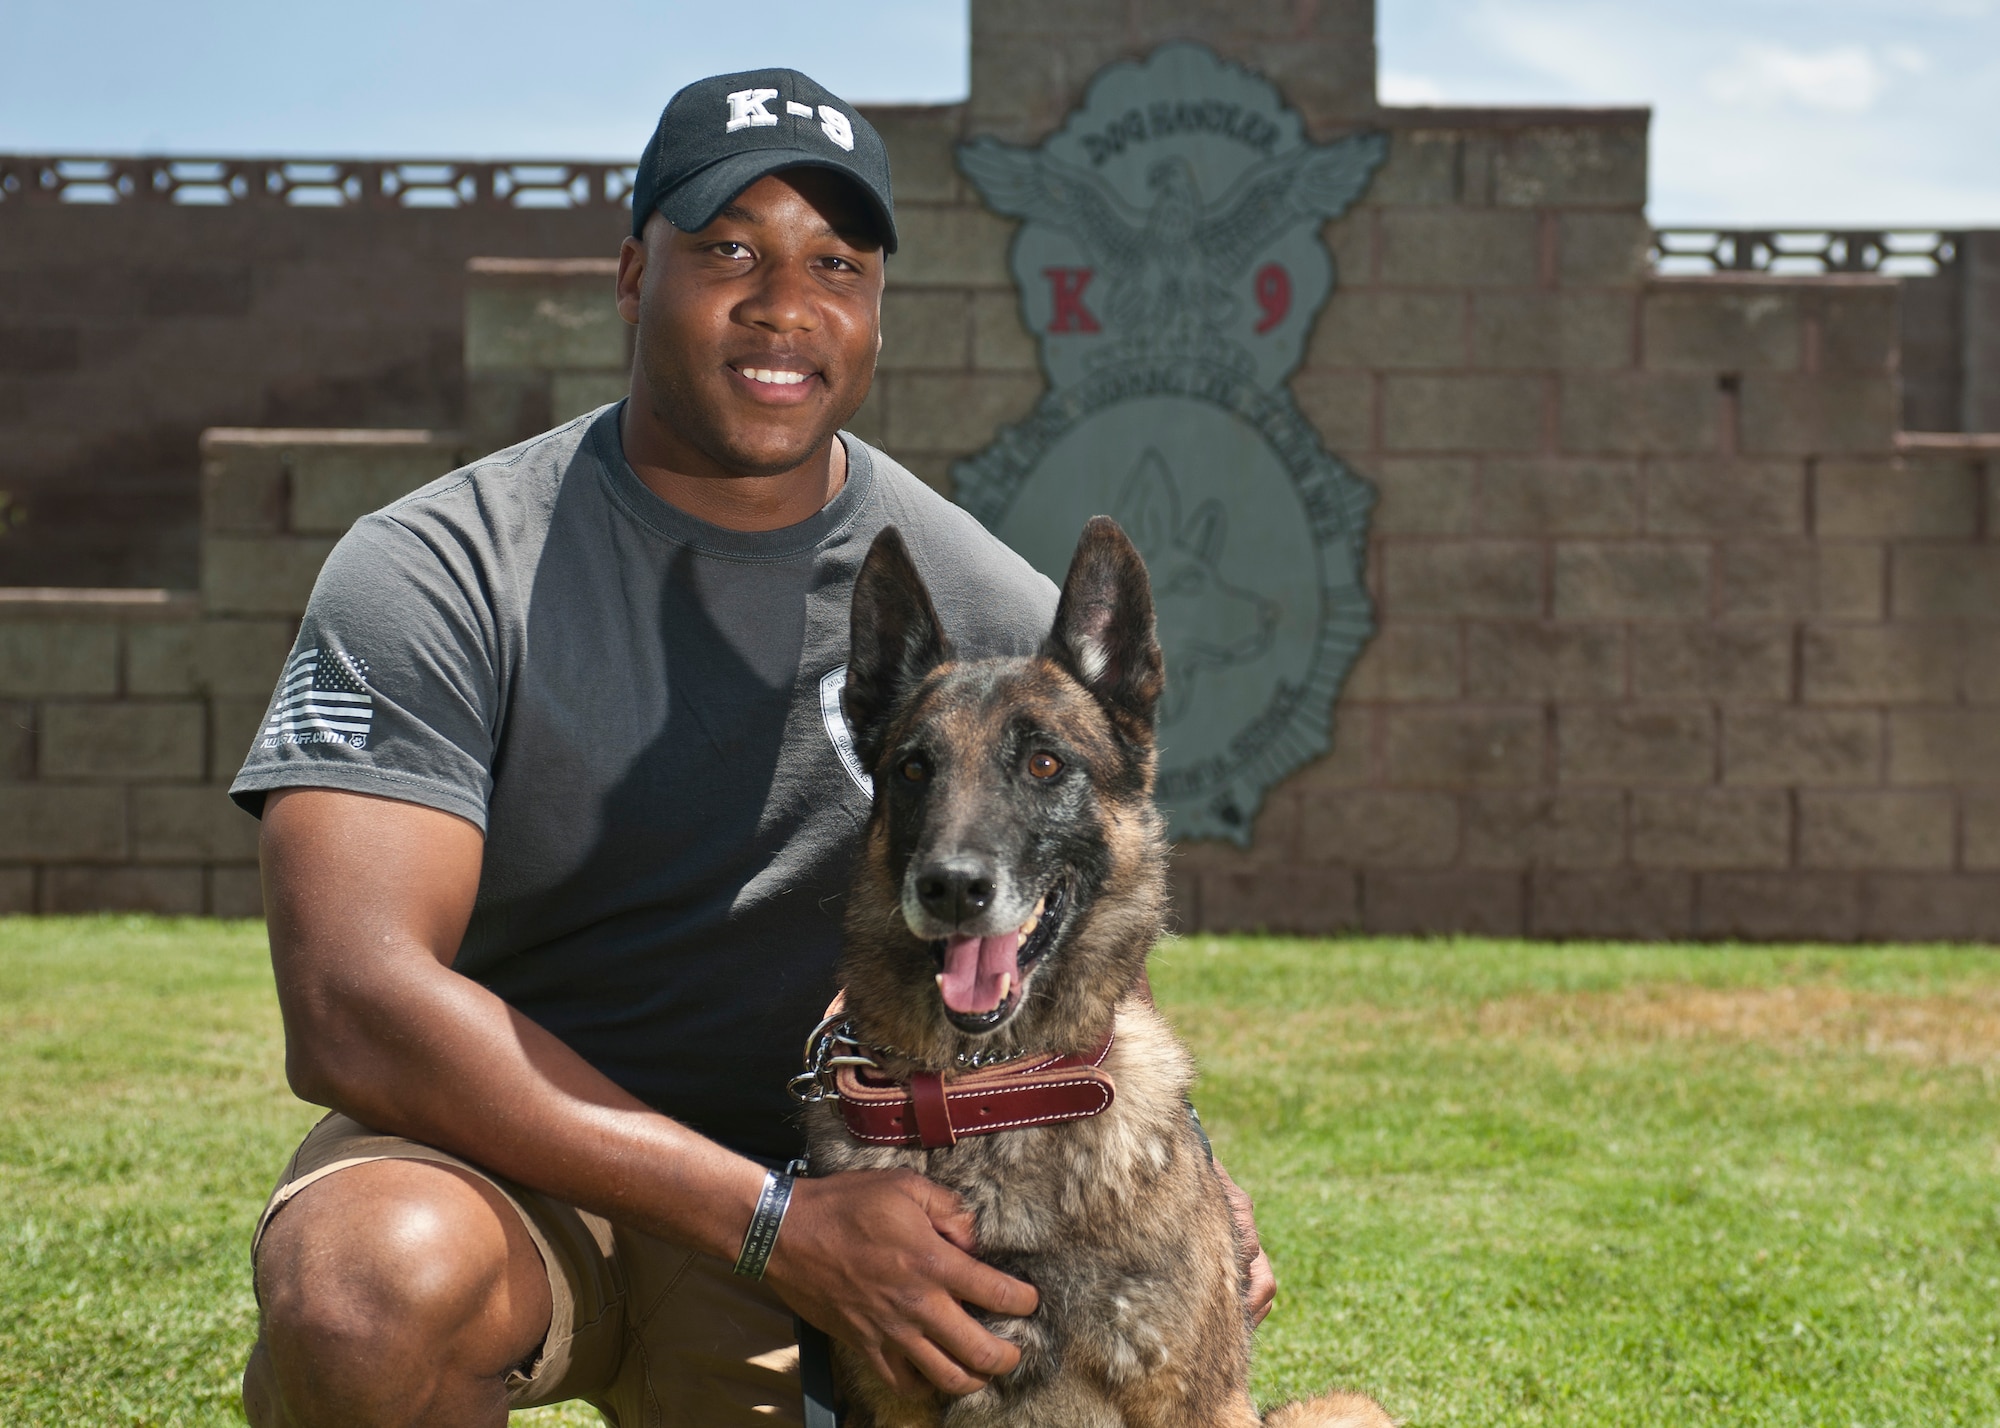 Staff Sgt. Mark Bush, 28th Security Forces Squadron military working dog handler, poses with his retired MWD, Chukky, at Nellis Air Force Base, Nev., July 10, 2015. Bush adopted his furry friend after two deployments and three and a half years together. (U.S. Air Force photo by Staff Sgt. Suita Ika/Released)